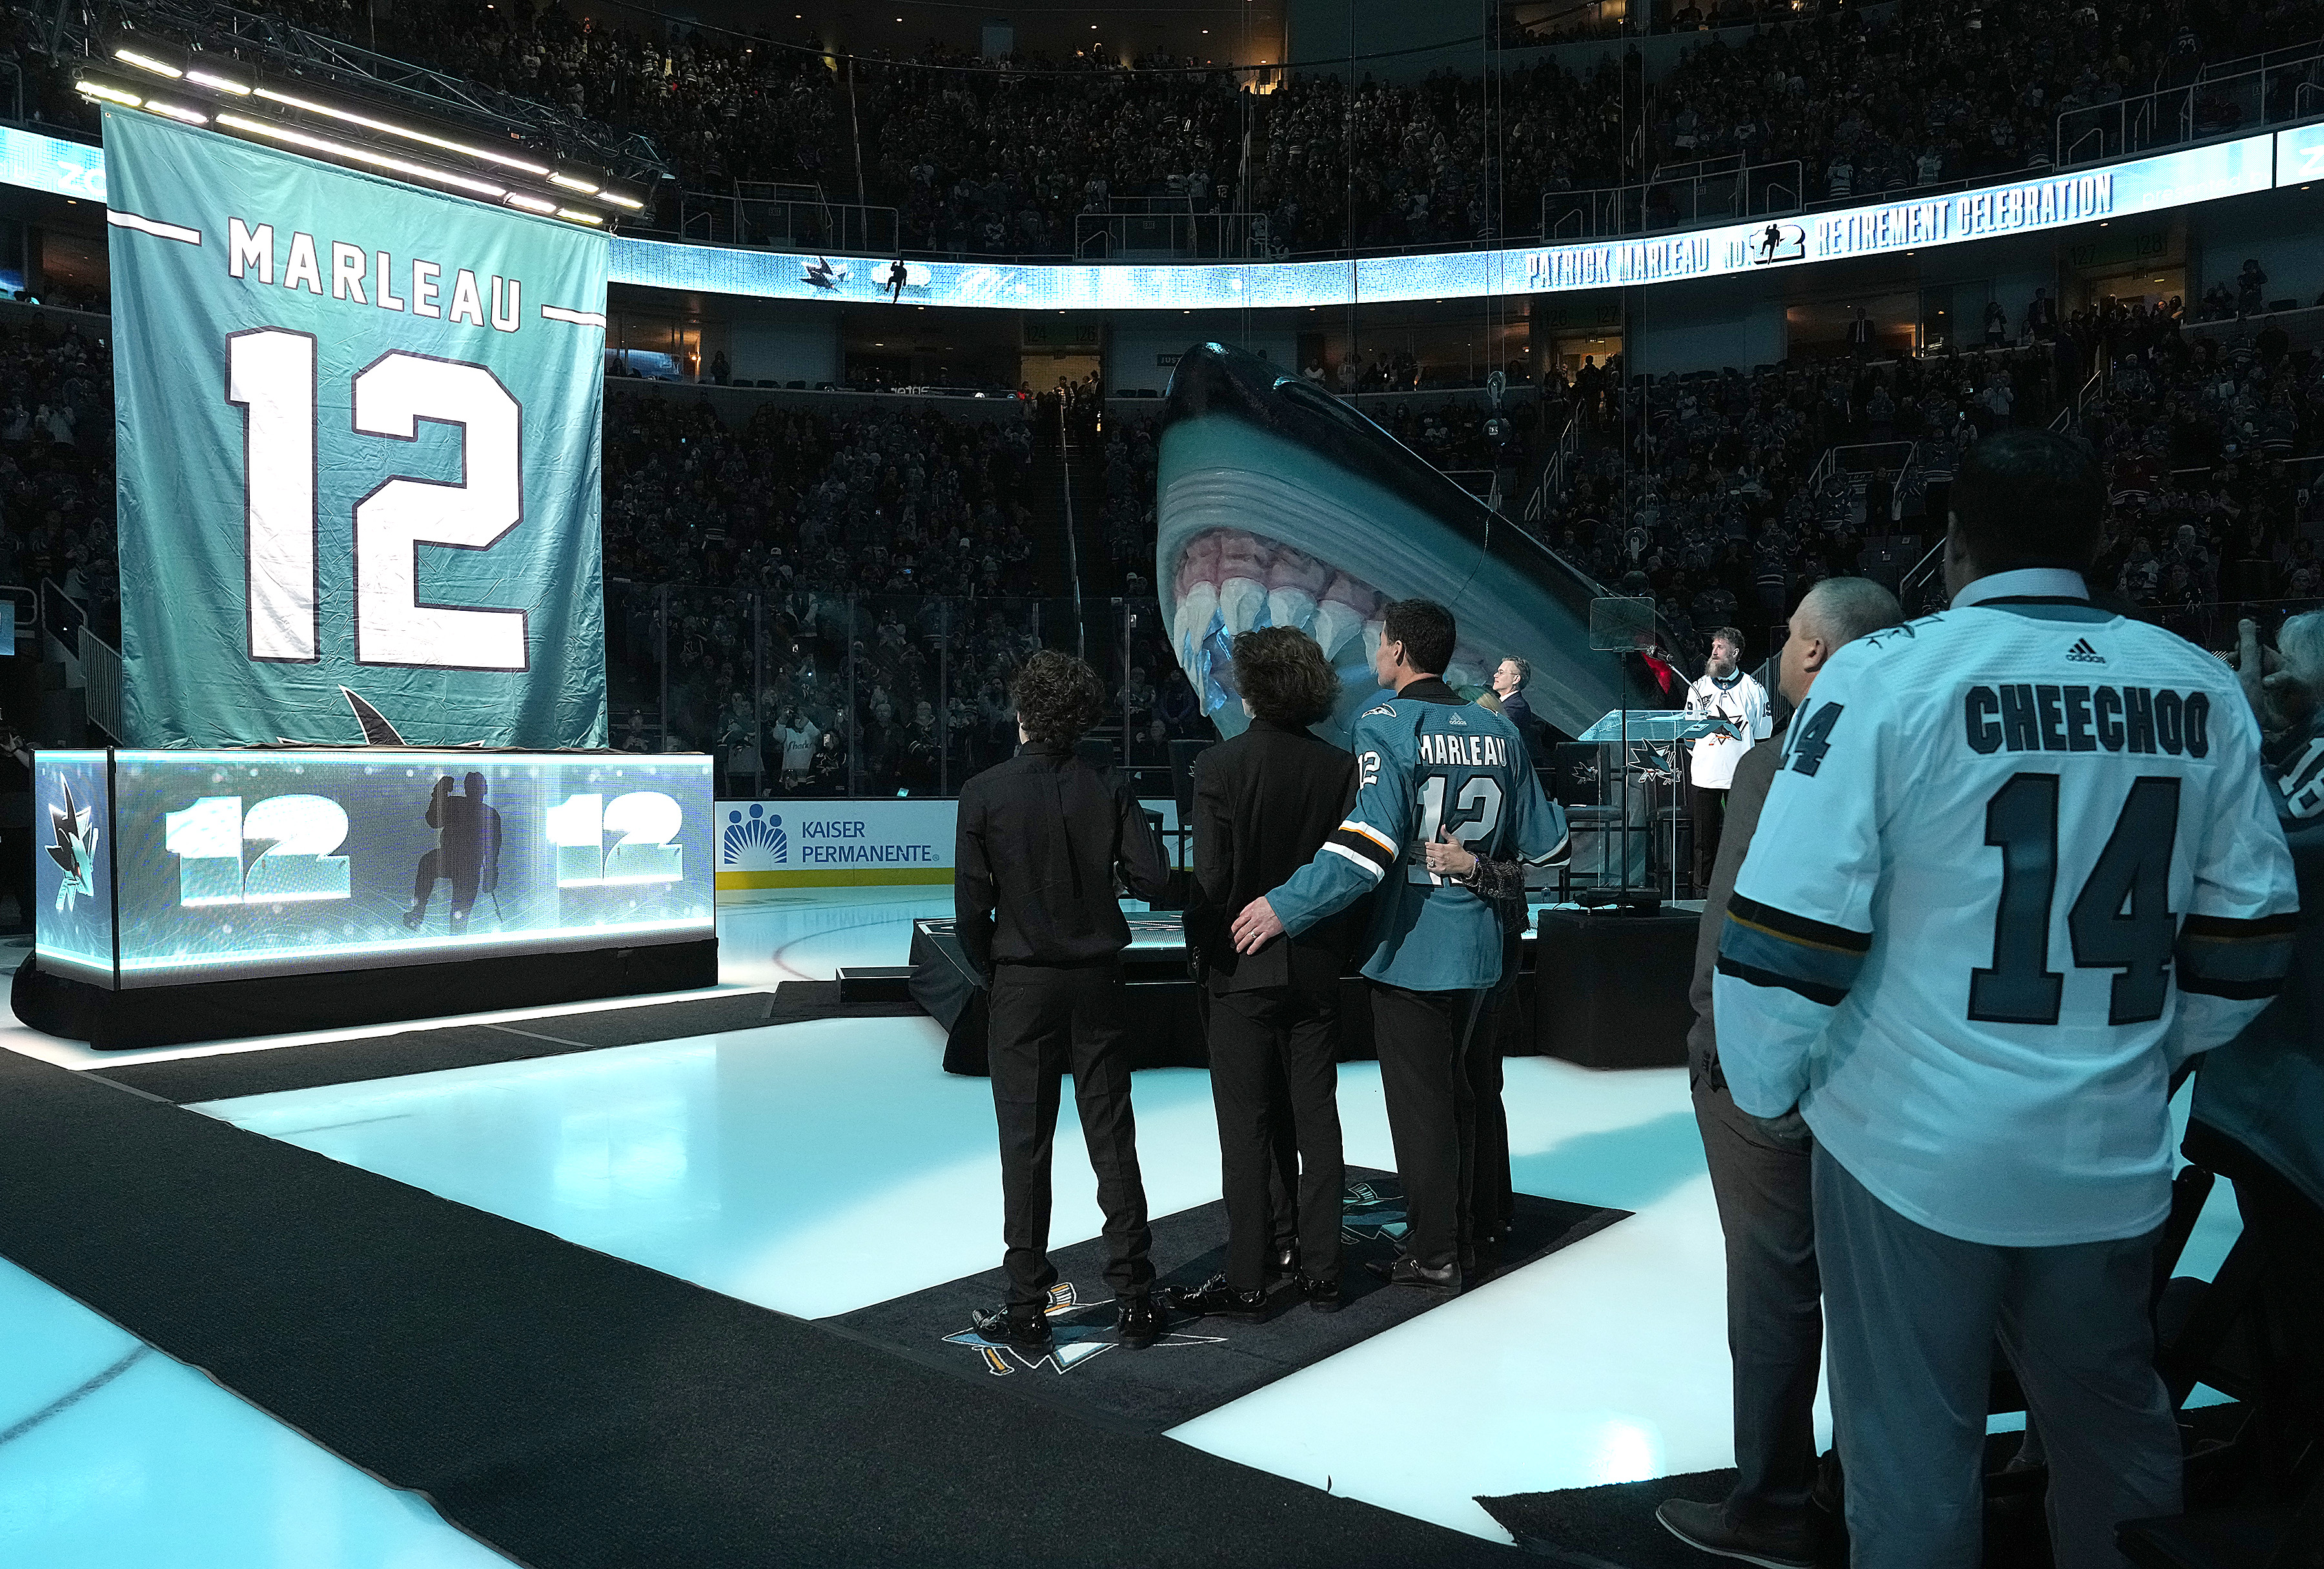 NHL - Patrick Marleau's number is going into the rafters of the Shark  Tank Is the next stop the Hockey Hall of Fame? 🤔